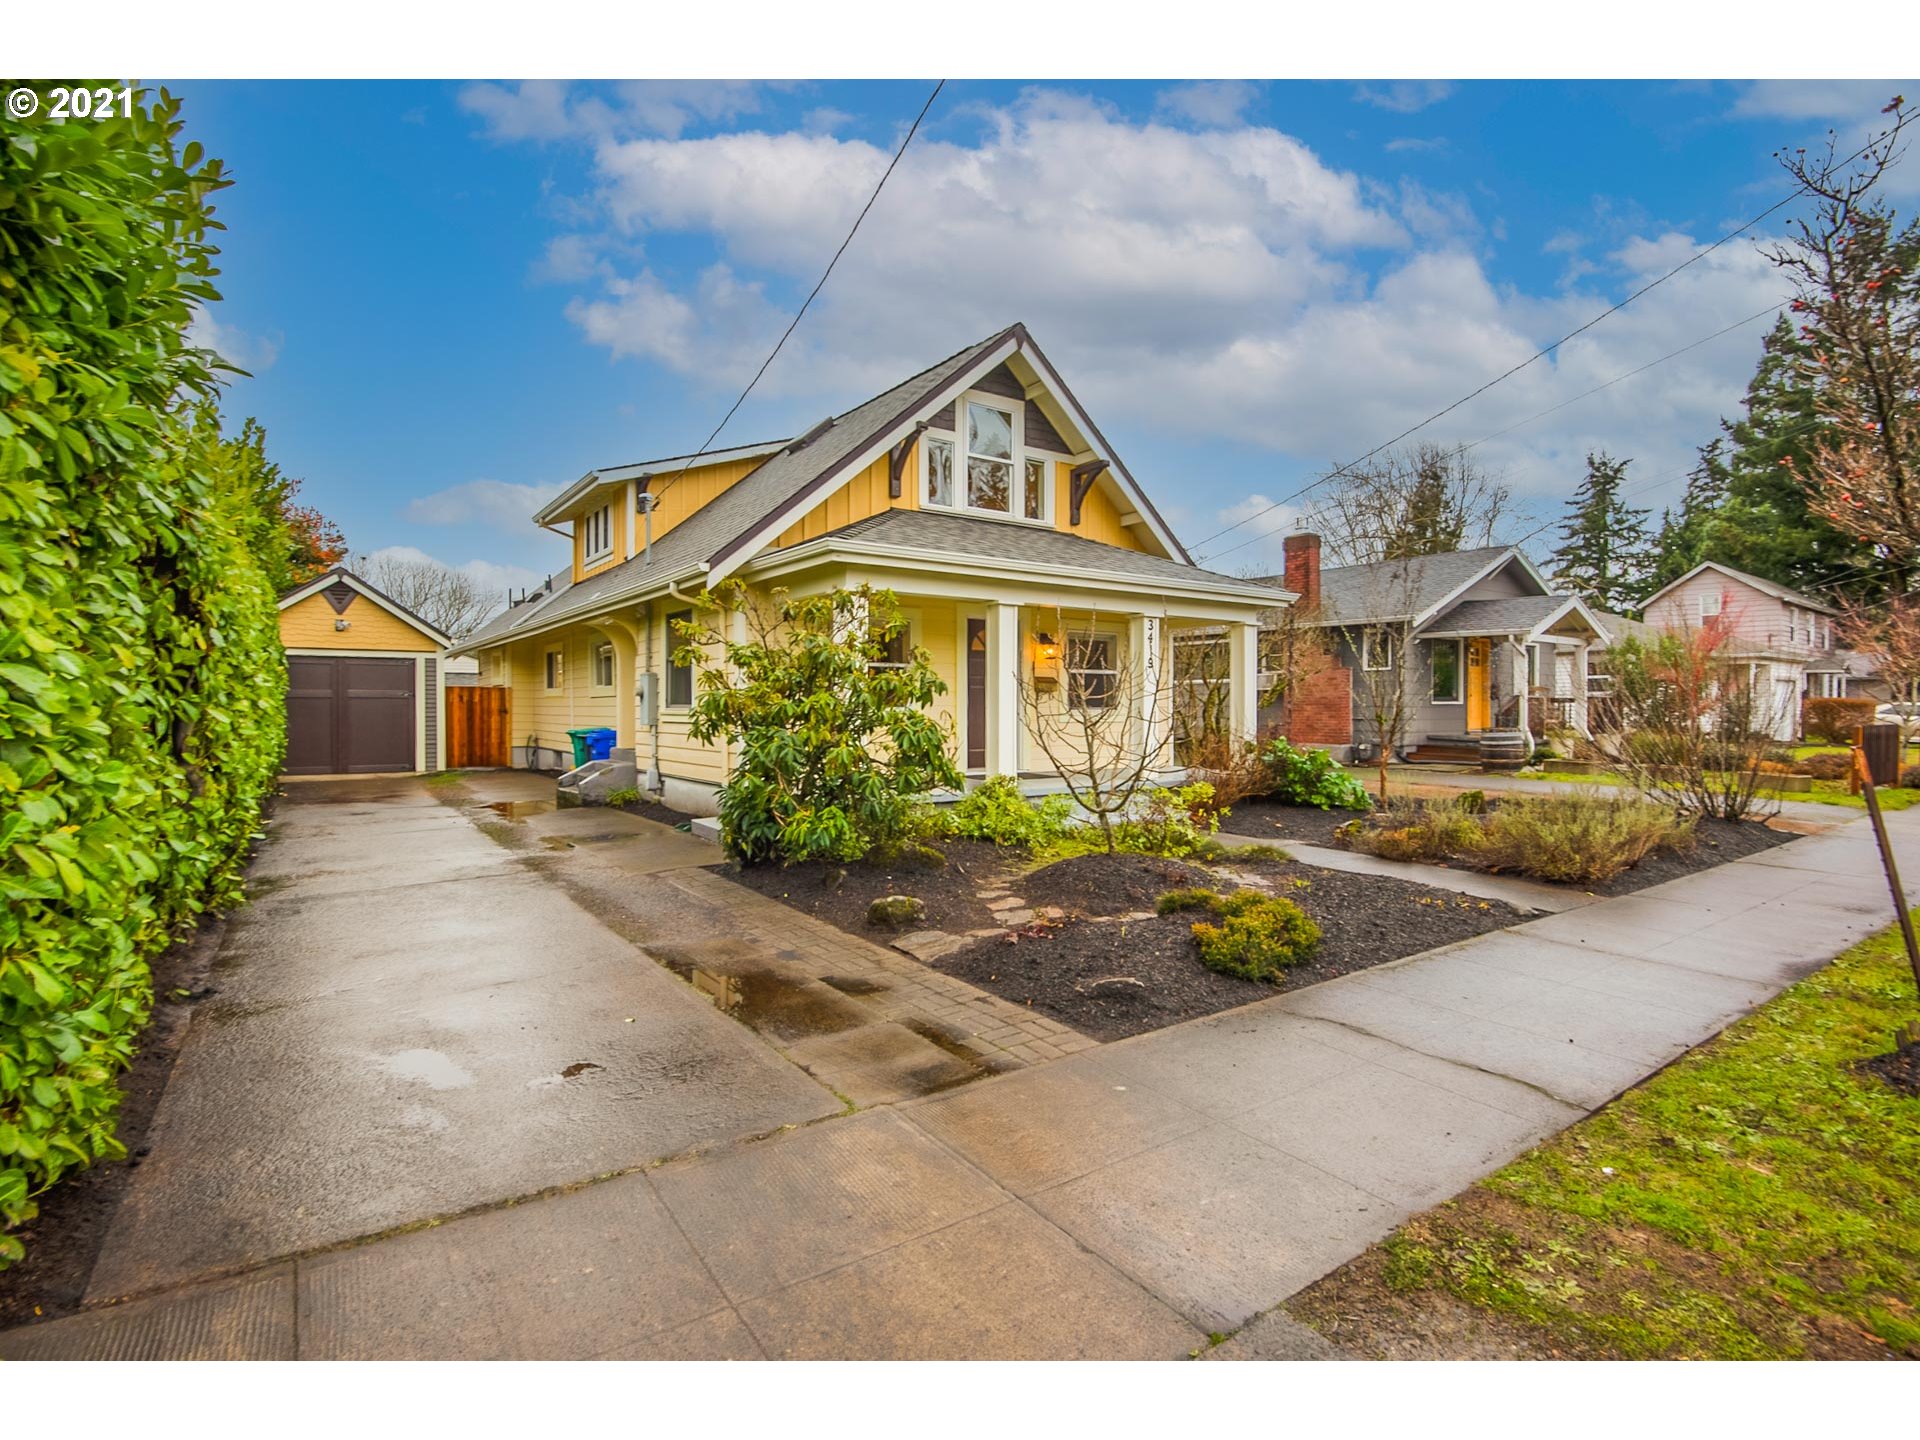 3419 SE 59TH AVE (1 of 32)